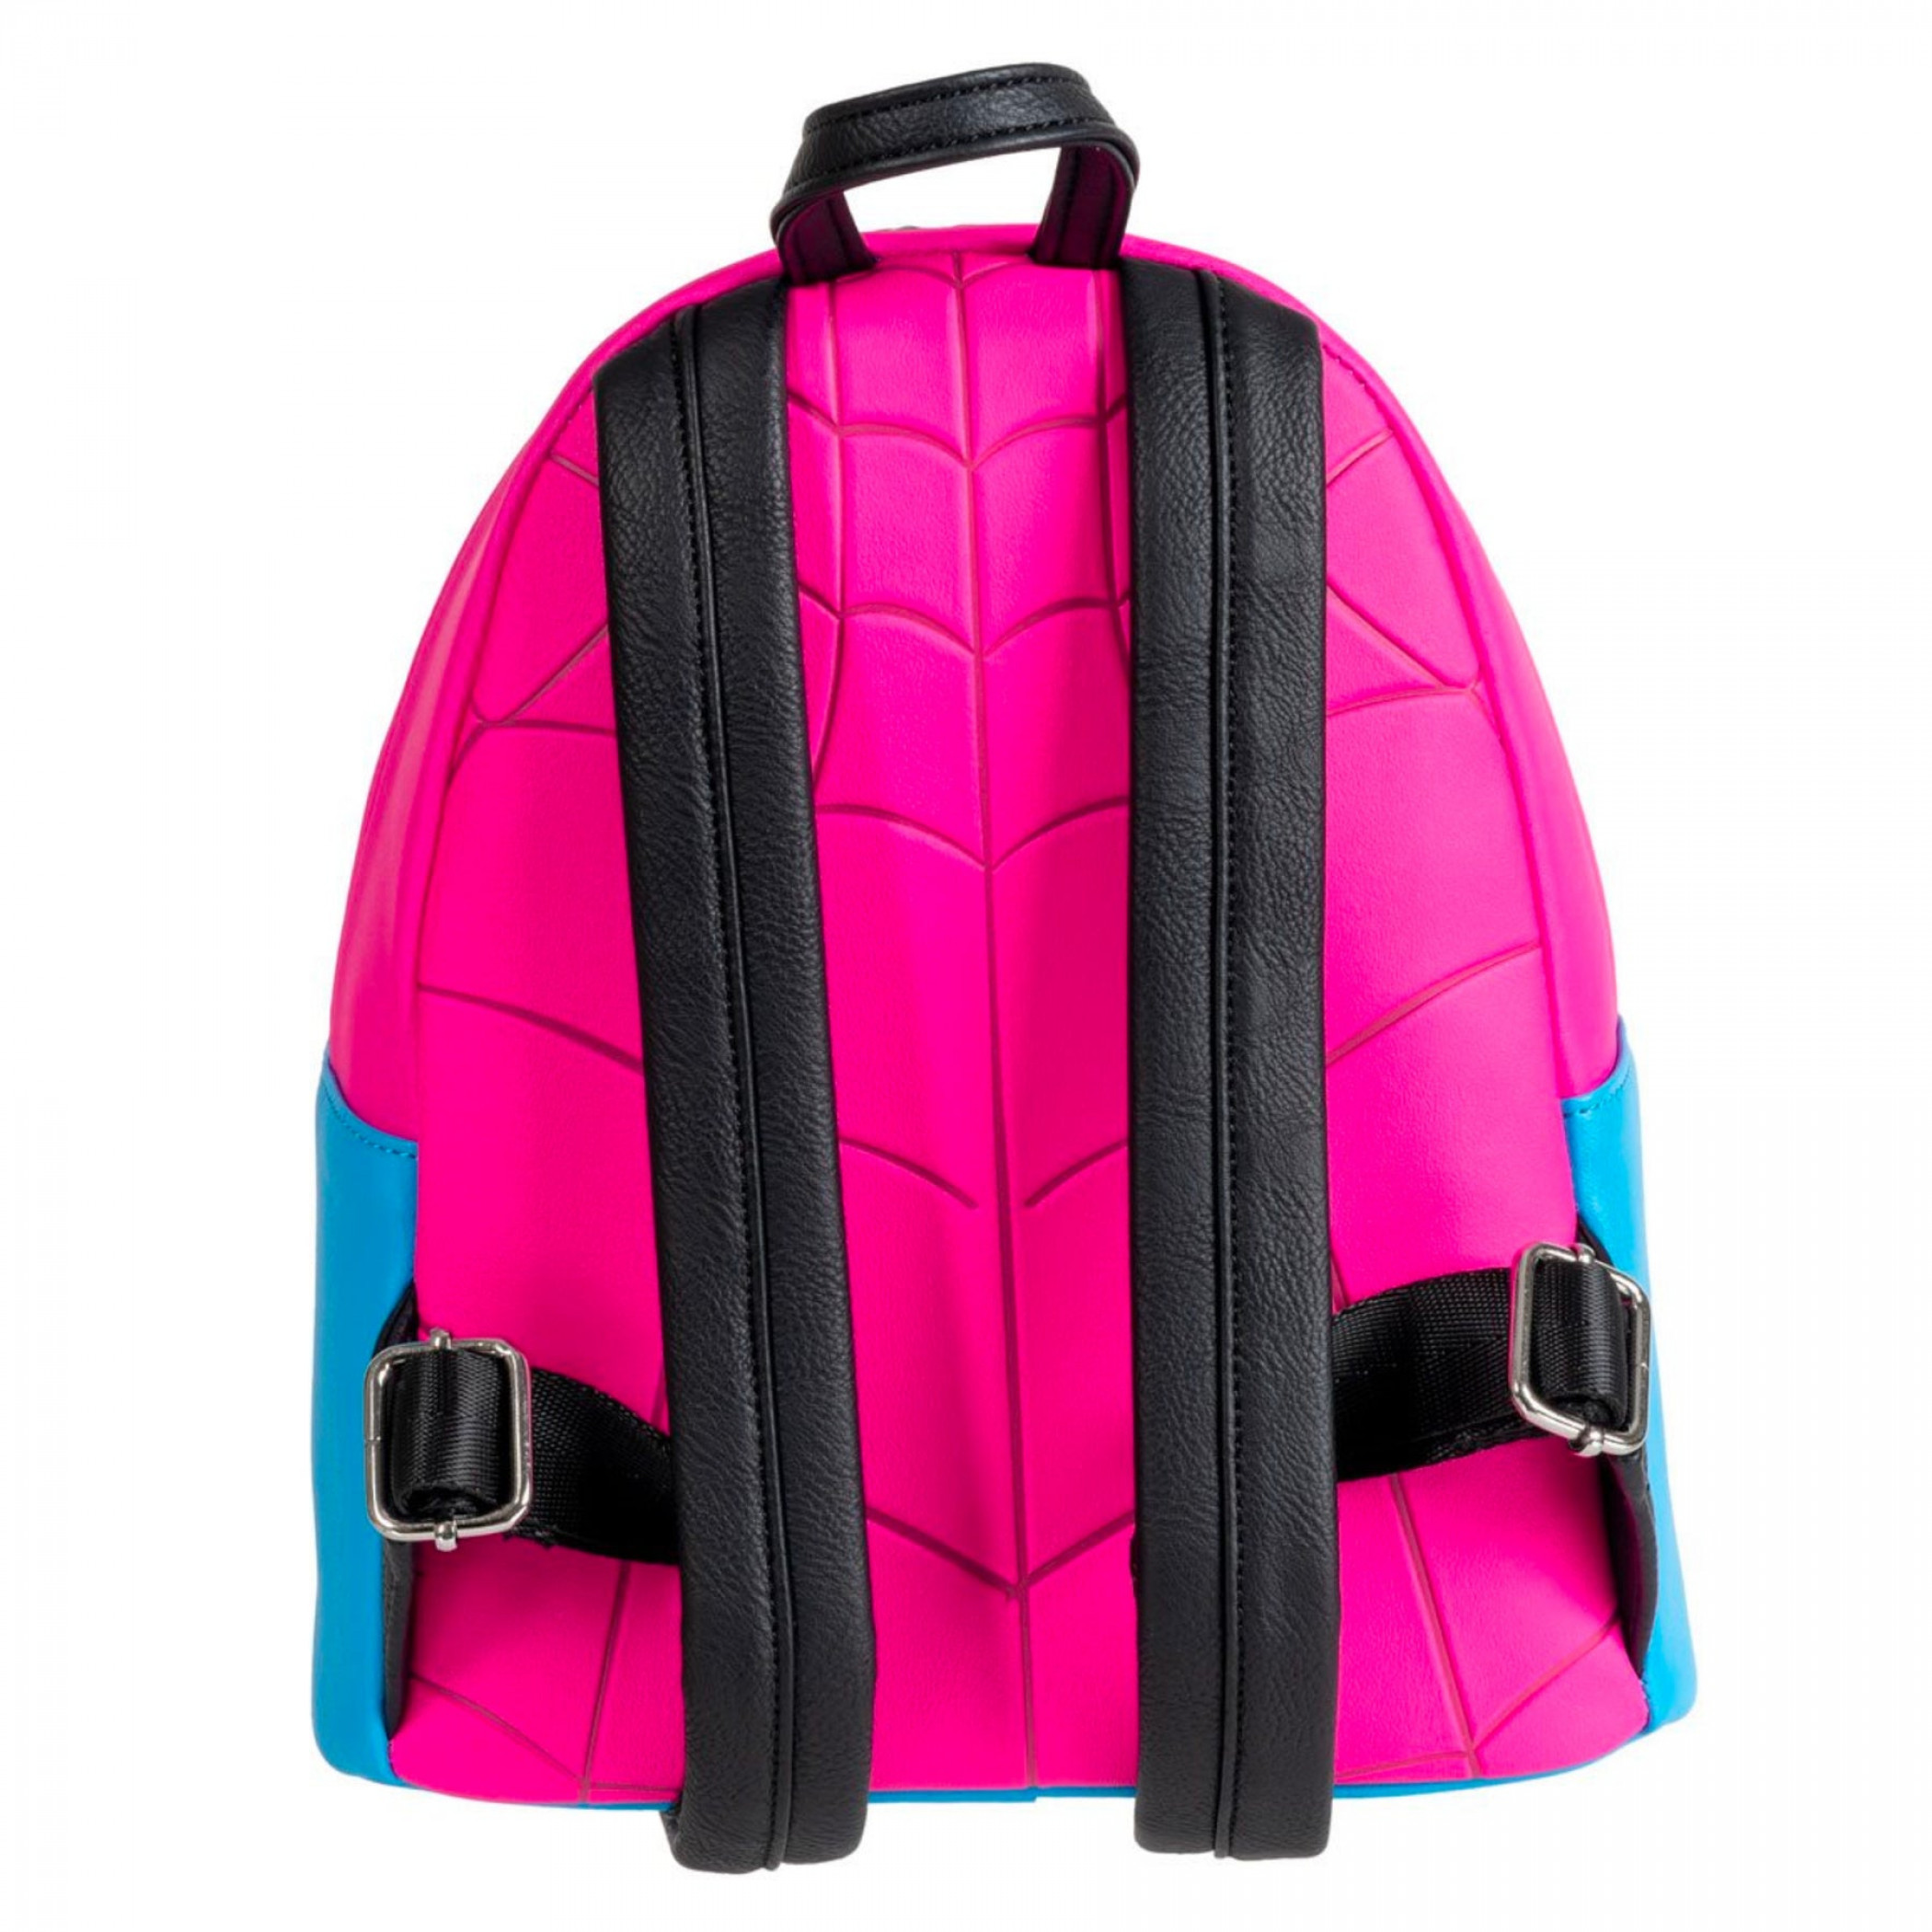 Spider-Man Cosplay Glow-in-the-Dark Mini-Backpack By Loungefly